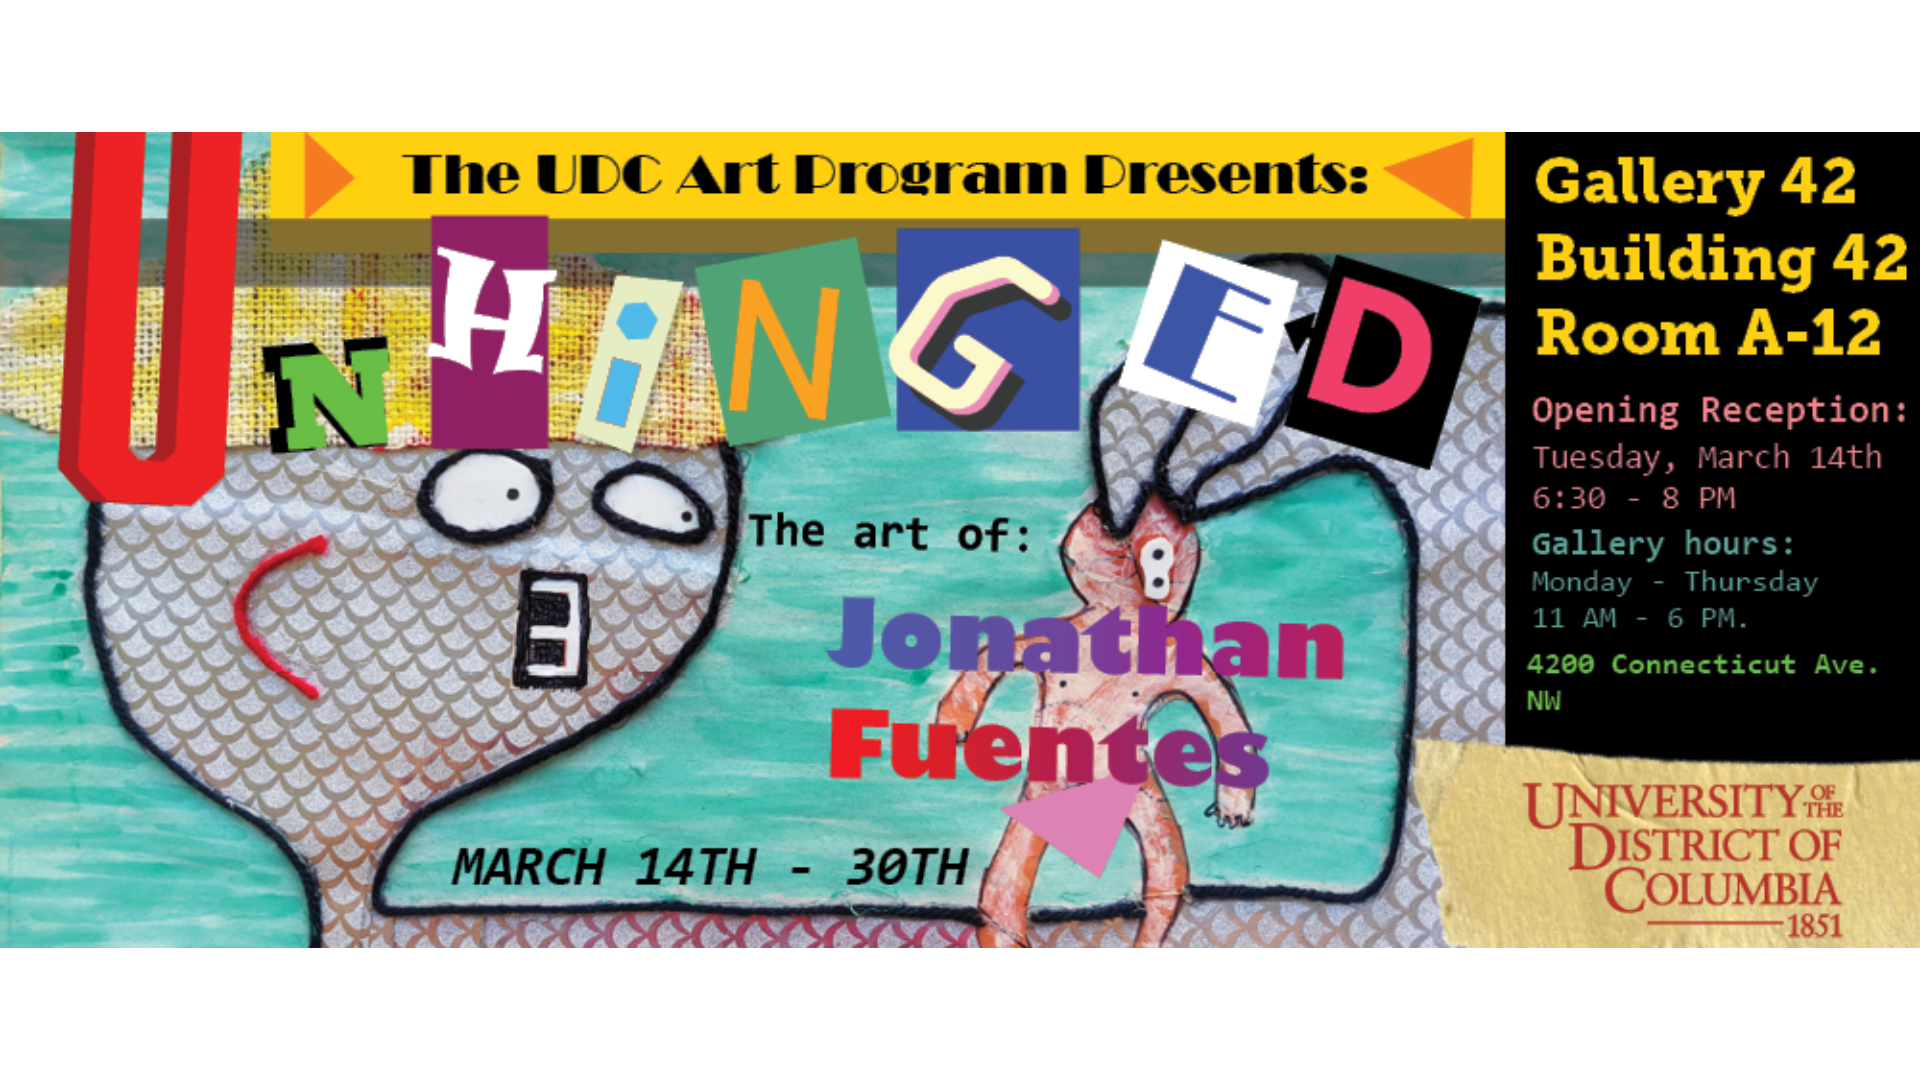 Dear UDC Community, The UDC Art Program has a new art exhibition opening in March, the week after Spring Break. The exhibition is "UNHINGED: The Art of Jonathan Fuentes," a collection of paintings, graphic designs, and sculptures by Art Program Senior Jonathan Fuentes. The exhibition is located in Gallery 42: building 42, room A-12. The opening reception is Tuesday, March 14 from 6:30 - 8:00 PM. The exhibition will then run until Thursday, March 30th. Regular gallery hours are Monday - Thursday 11:00 AM - 6:00 PM. Please stop by during gallery hours to view this exhibition, your support is greatly appreciated! For more information, please contact Professor Daniel Venne at dvenne@udc.edu